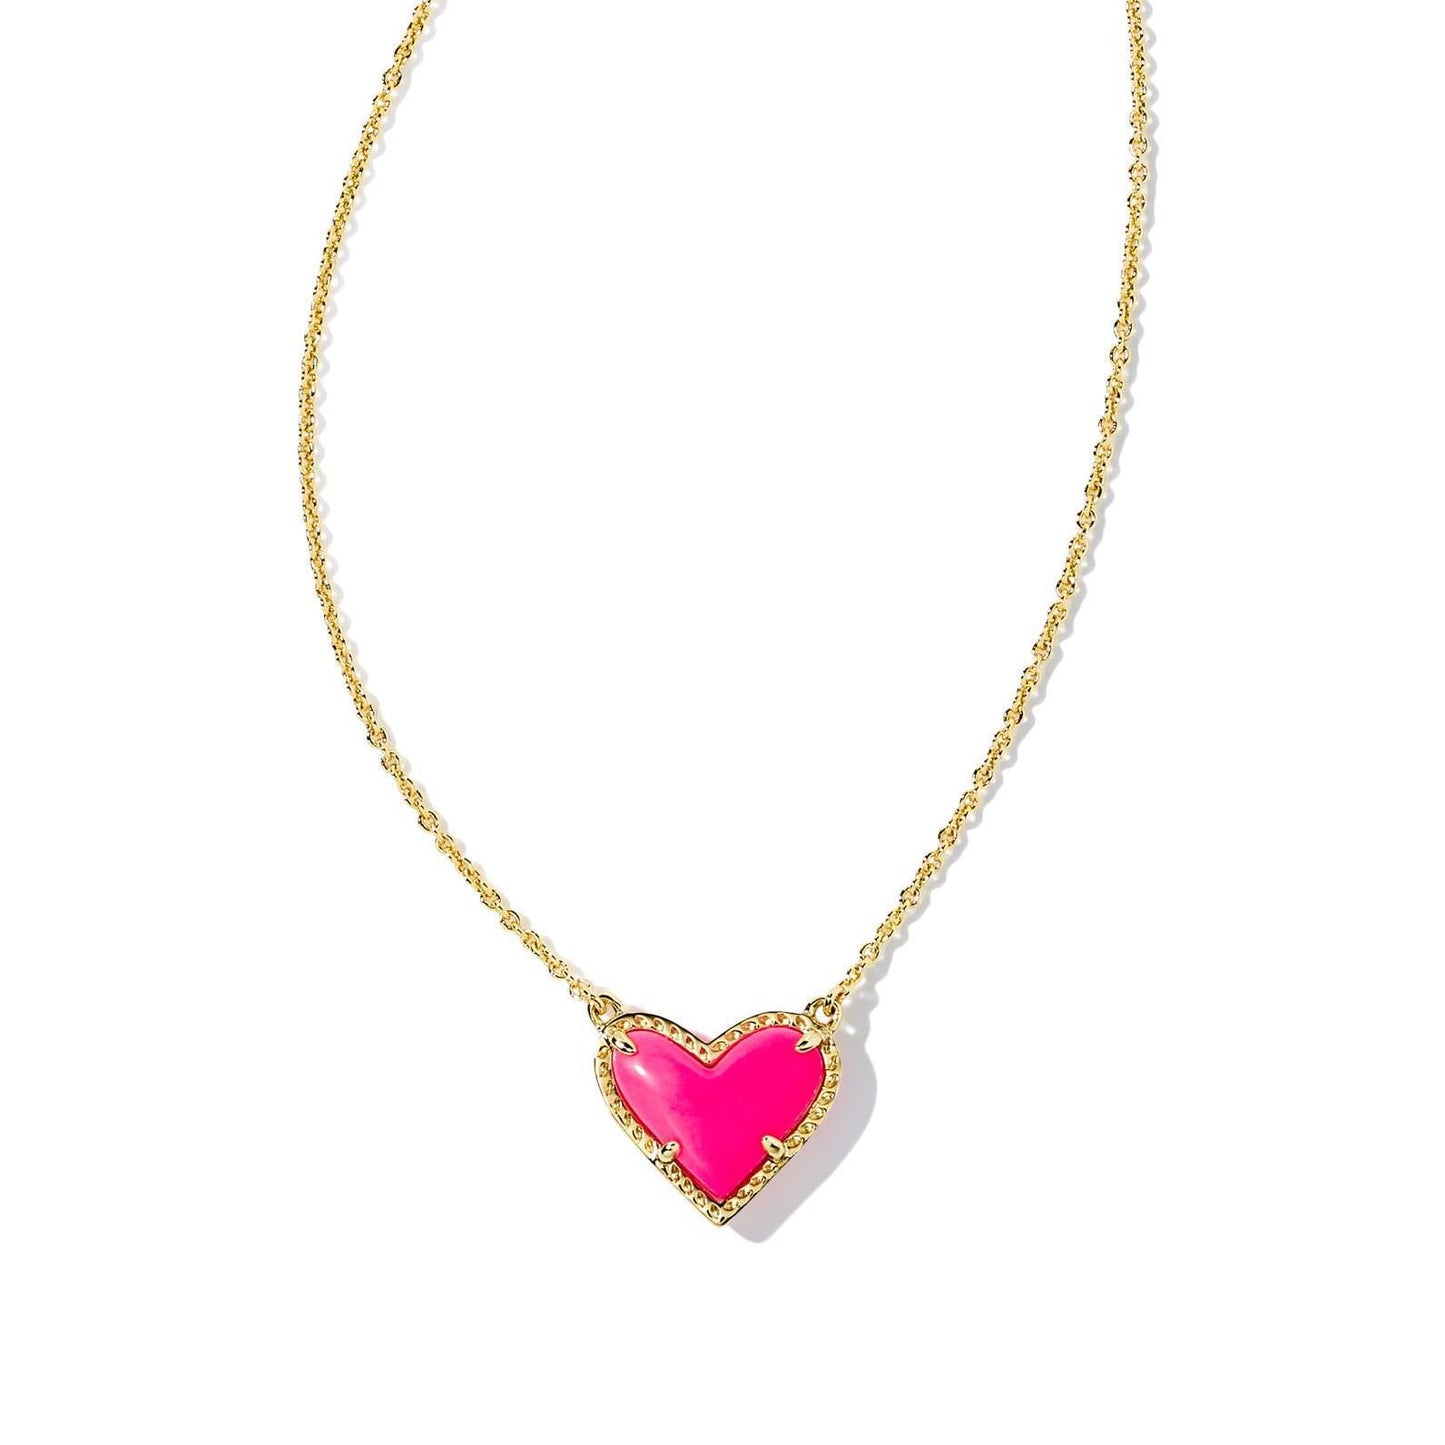 Heart-shaped Necklace Adjustable Peach Heart Natural Stone Clavicle Chain Love Necklace For Women Valentine's Day